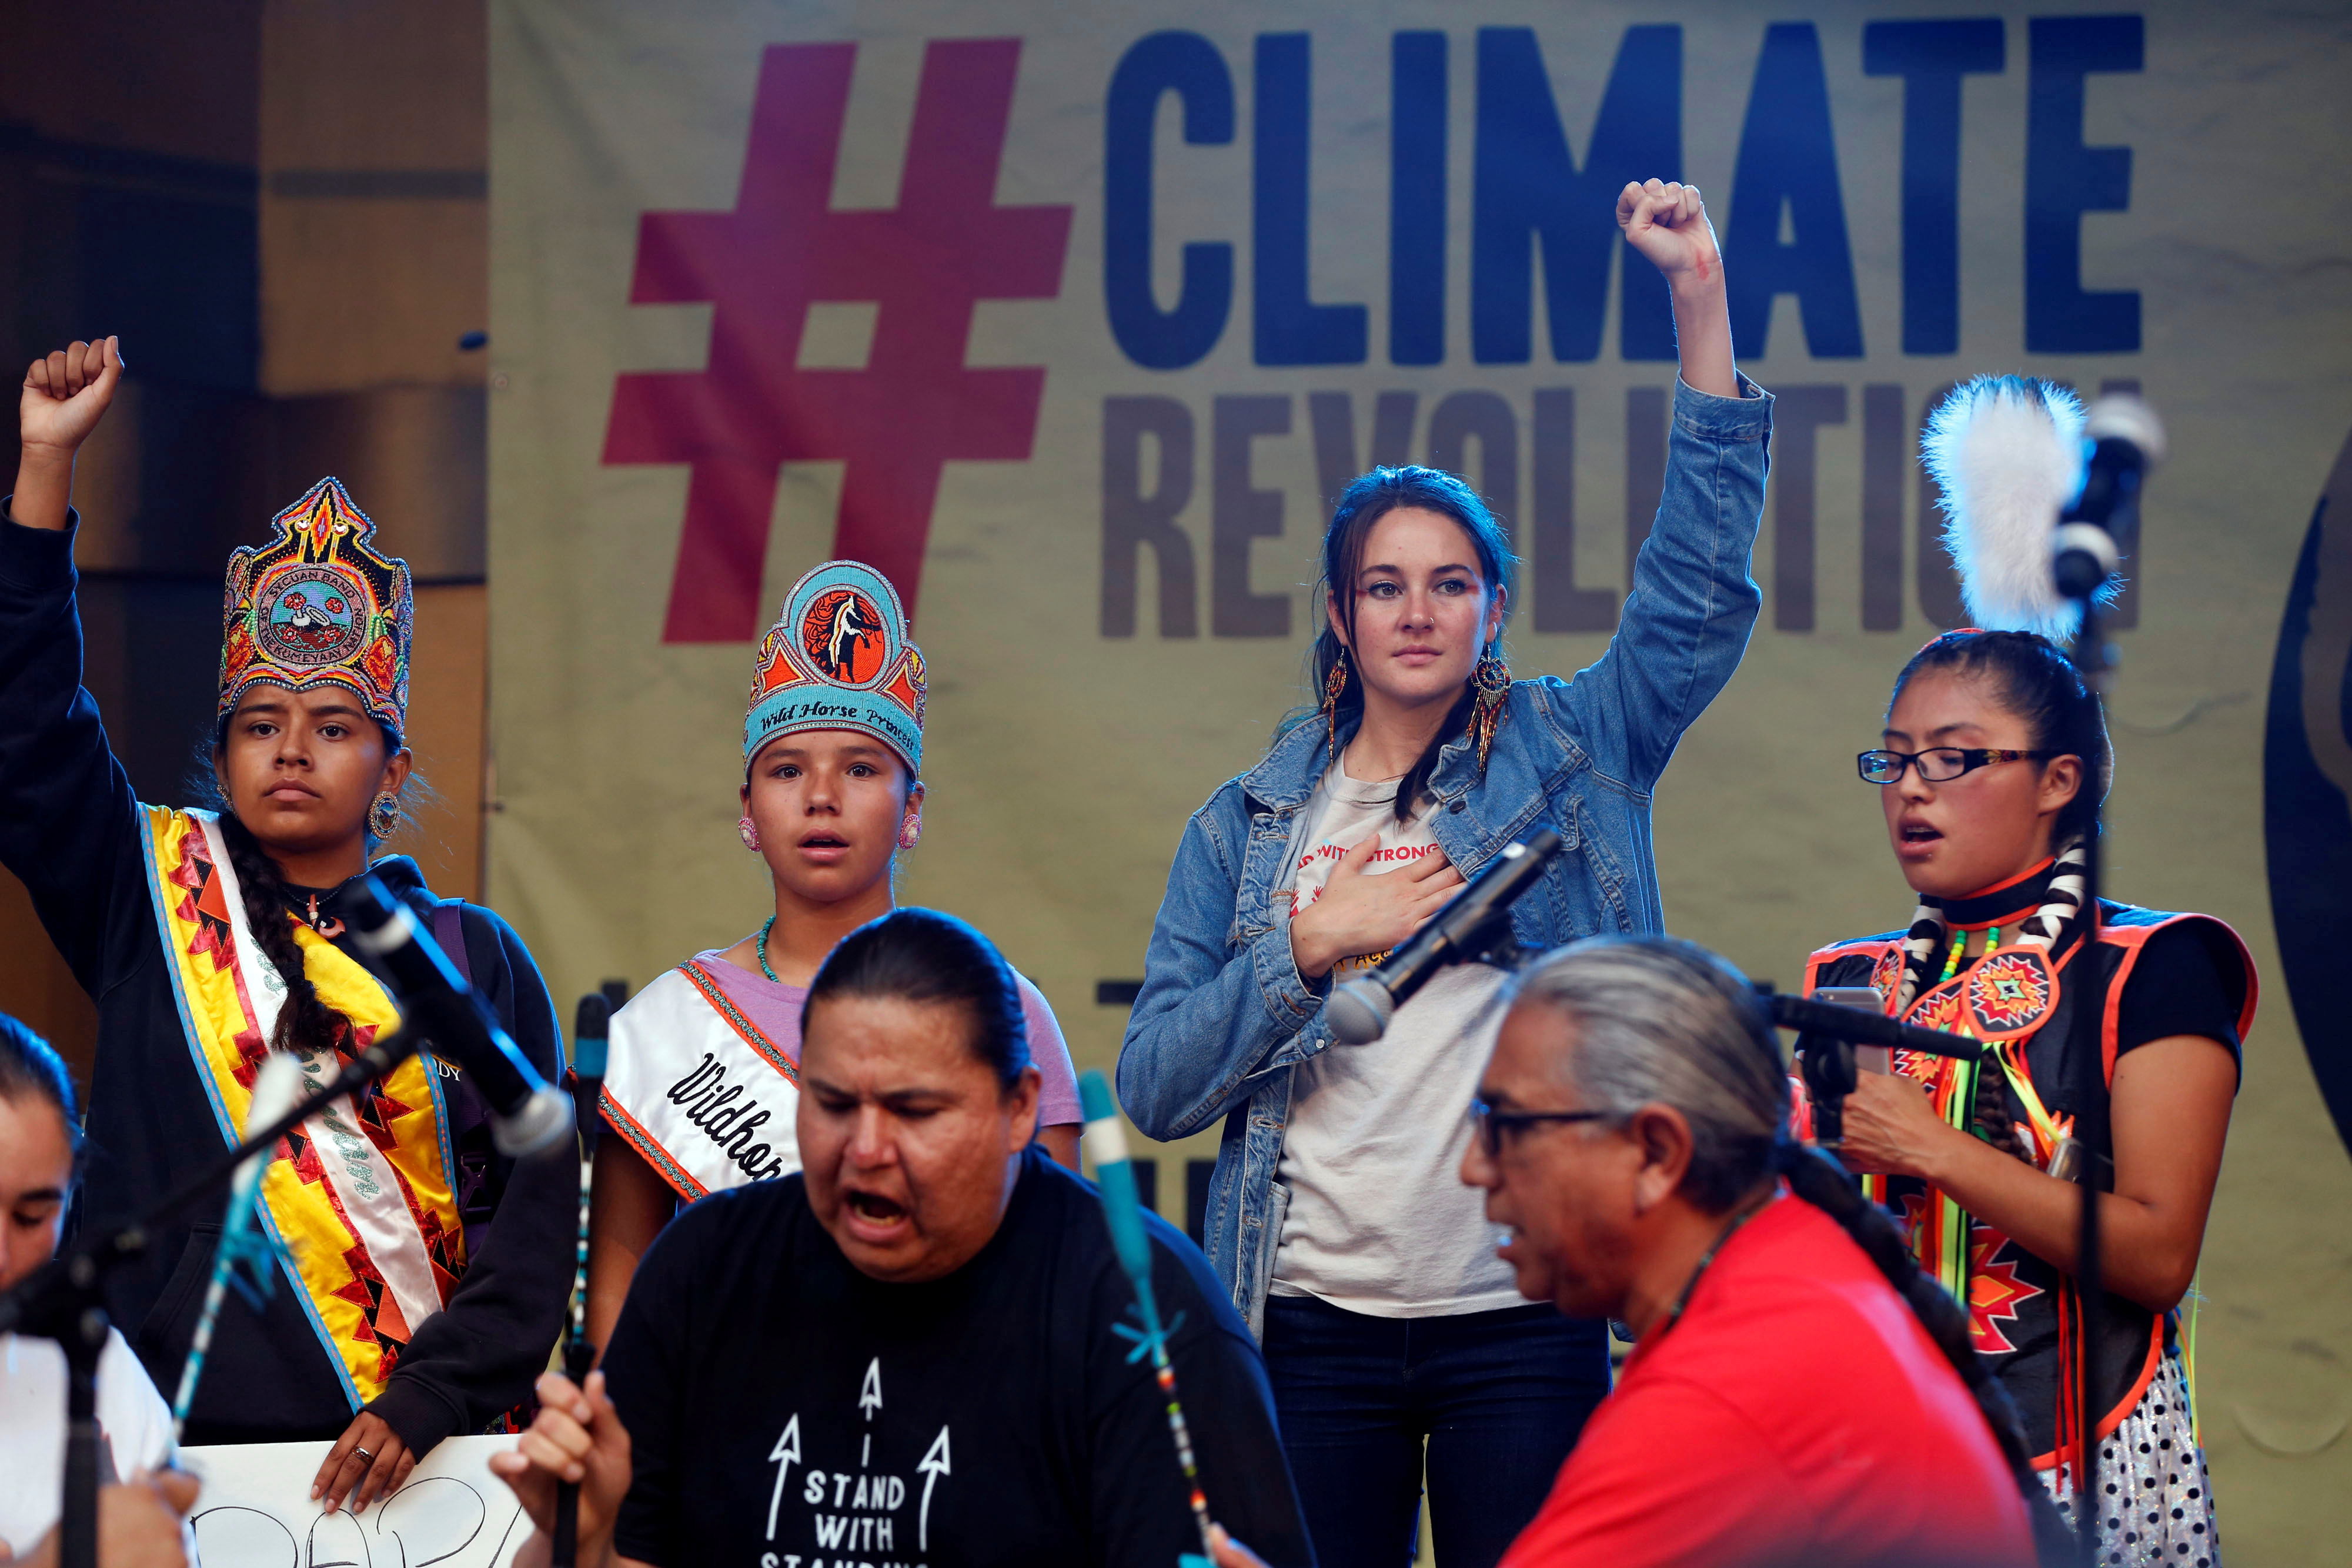 Actor Shailene Woodley stands with Native Americans on stage during a climate change rally in solidarity with protests of the pipeline in North Dakota at MacArthur Park in Los Angeles, California Oct. 23, 2016. (Patrick Fallon—Reuters)